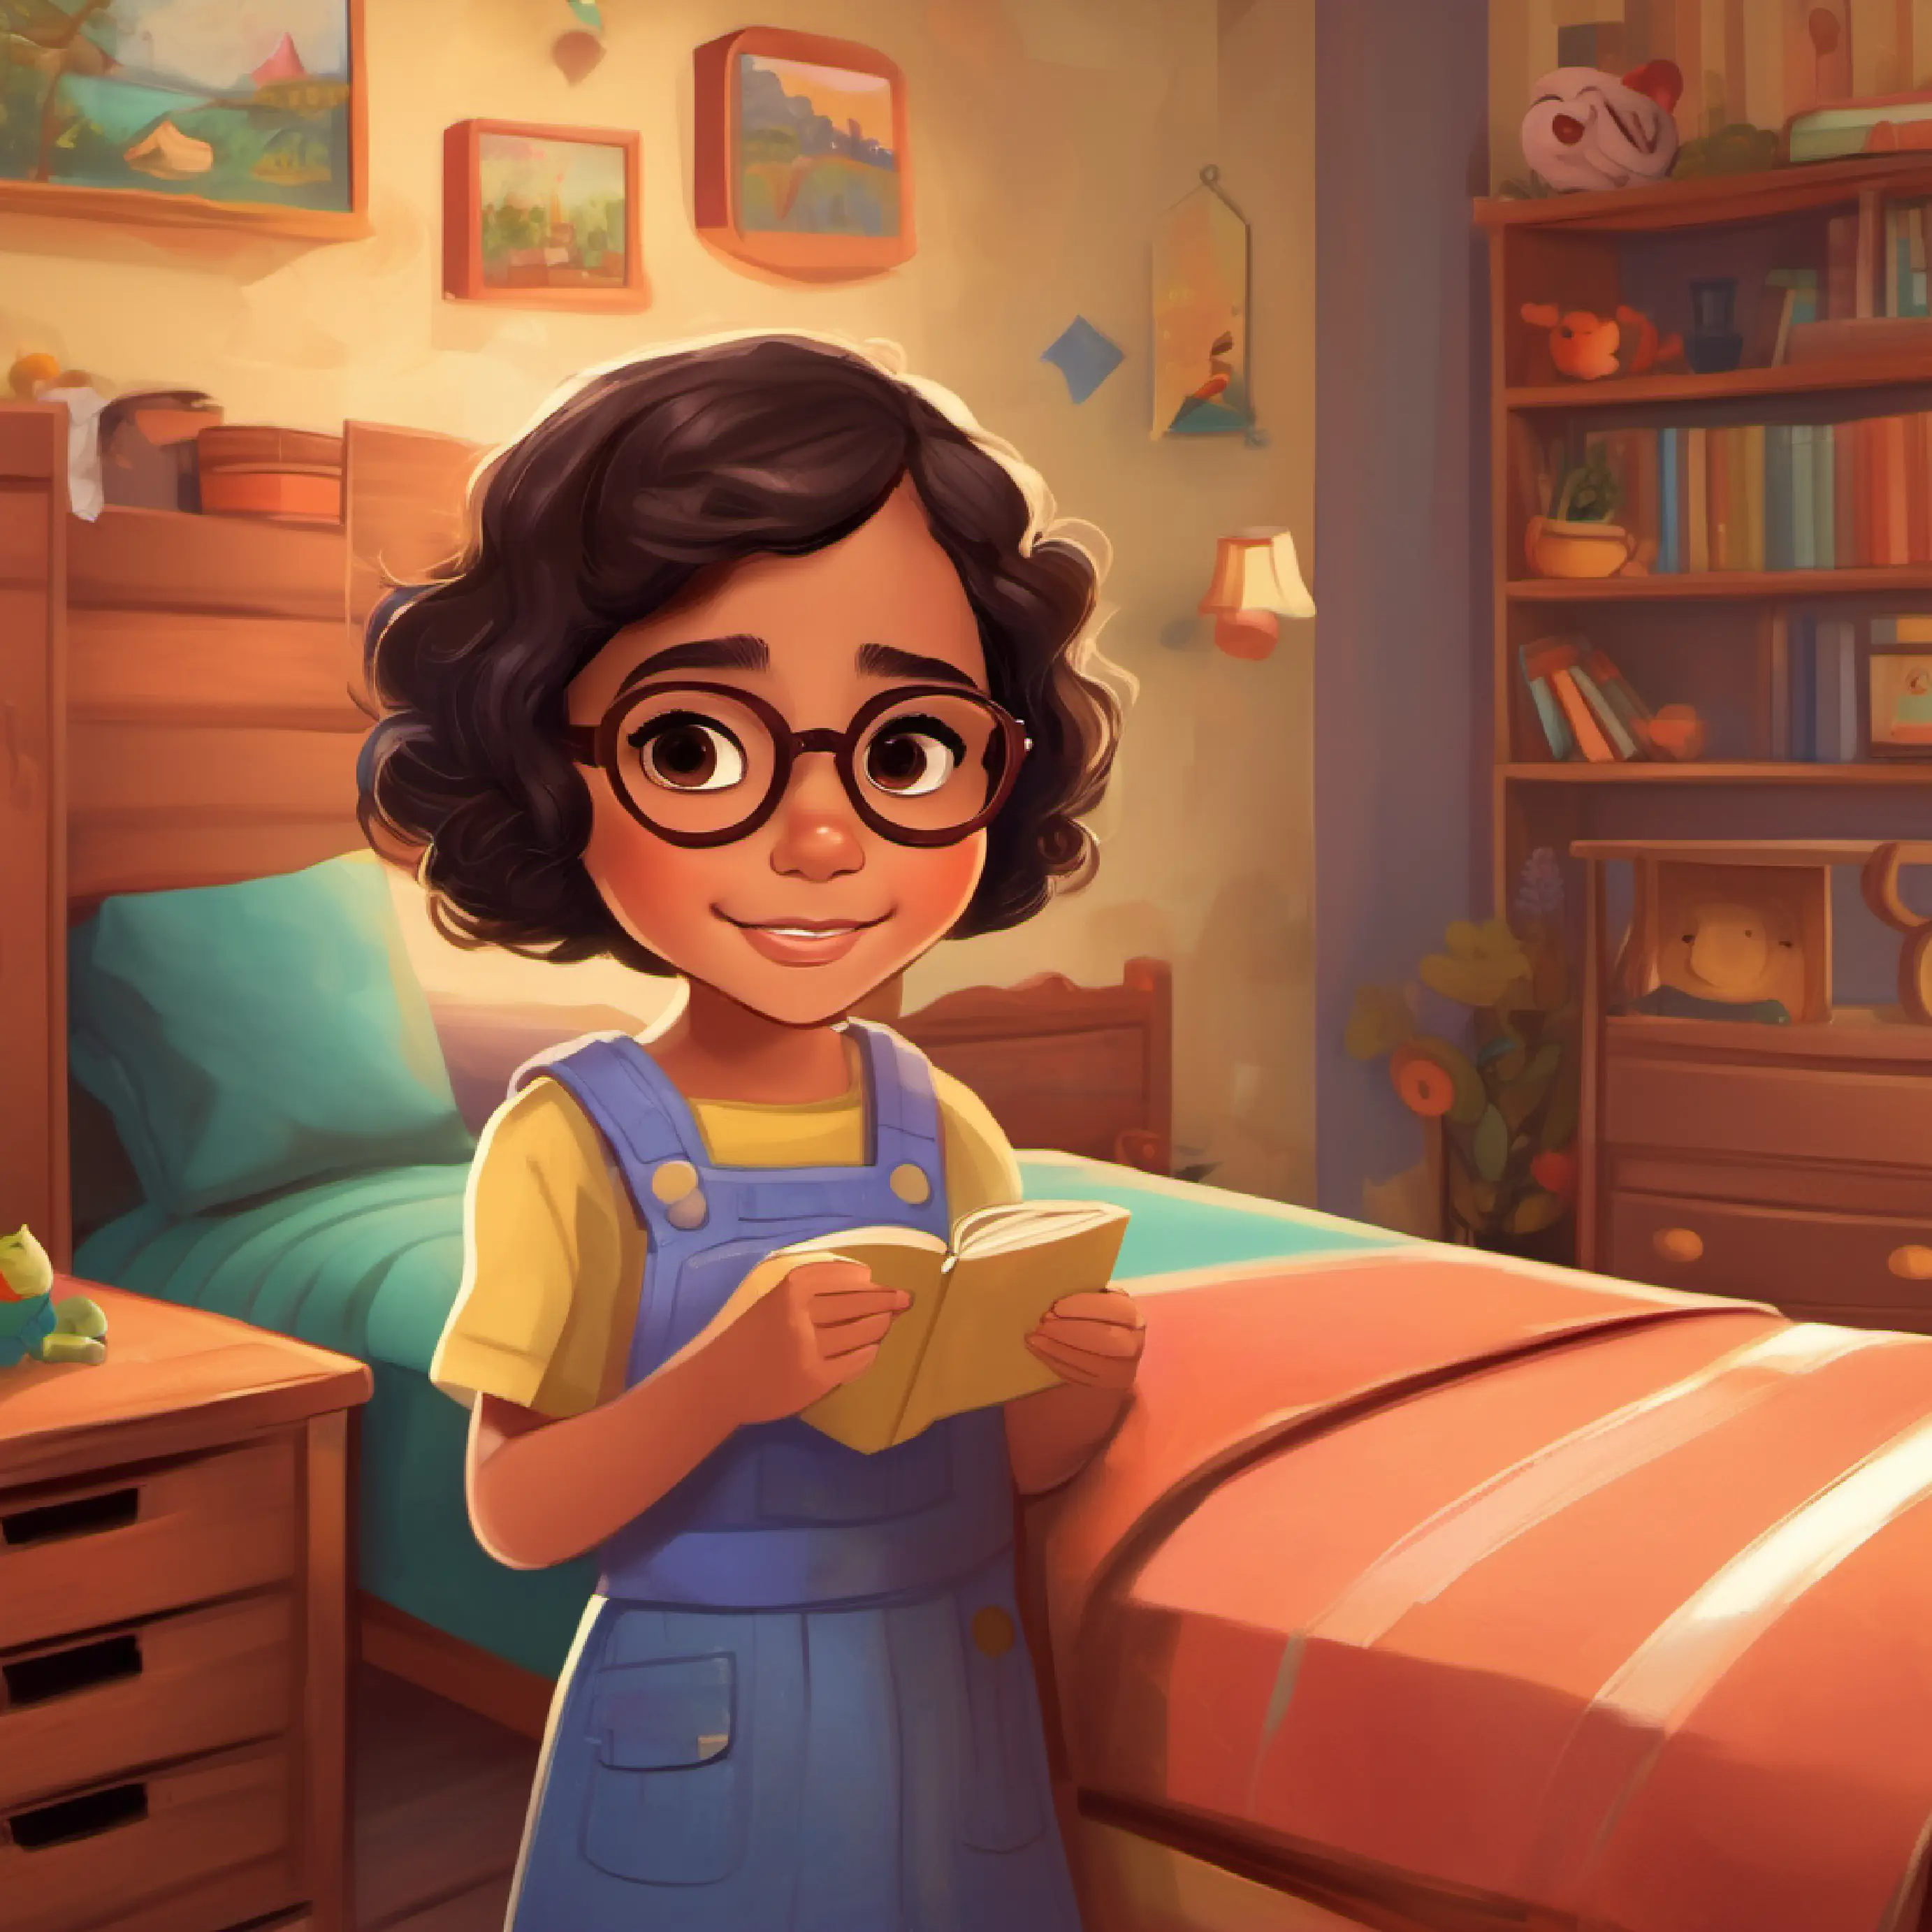 Nayeli in her room, wearing her glasses